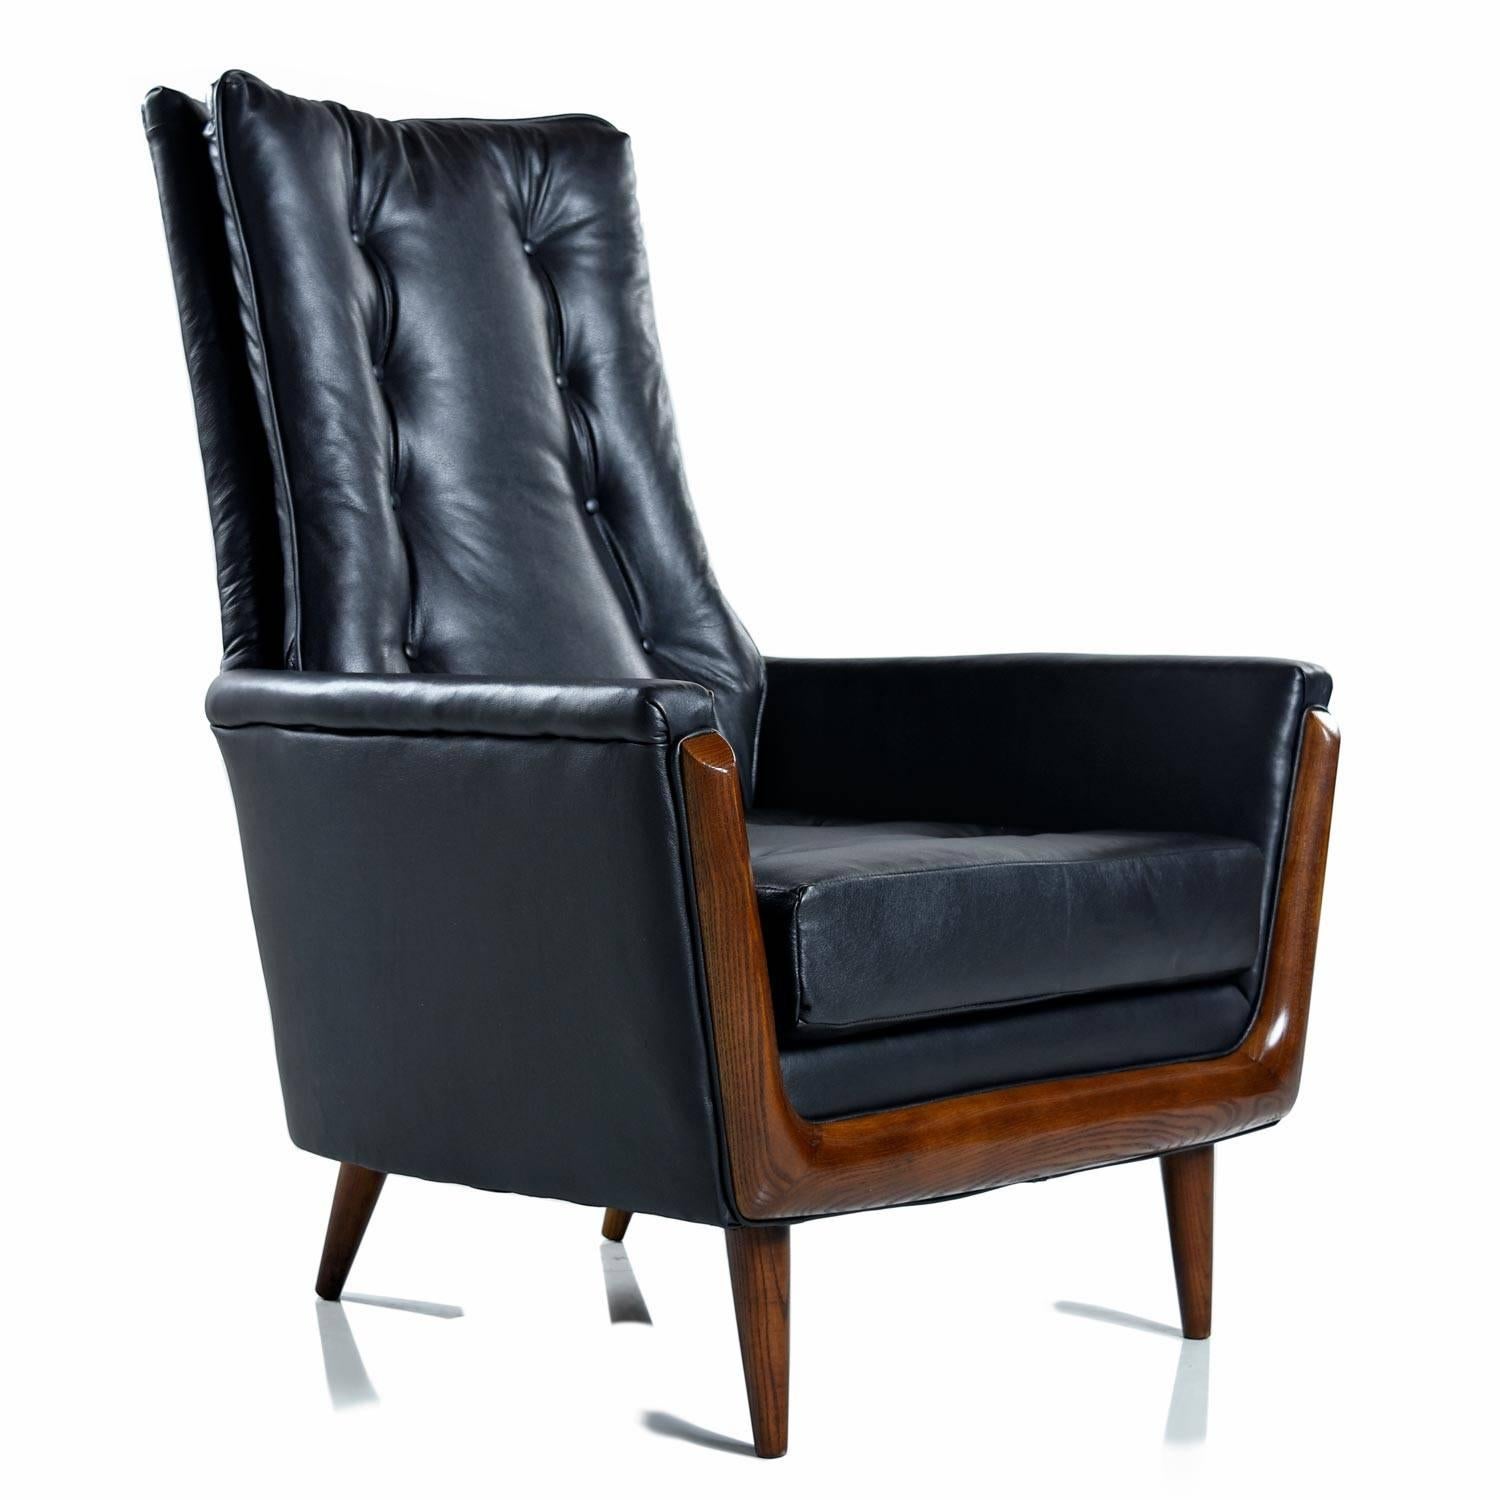 Dashing, masculine and sophisticated. Completely restored by our in-house cabinet shop and upholsterer who mimicked the original button tuft pattern. The chair is unmarked, but the sleek design shows strong influence from Adrian Pearsall . View from